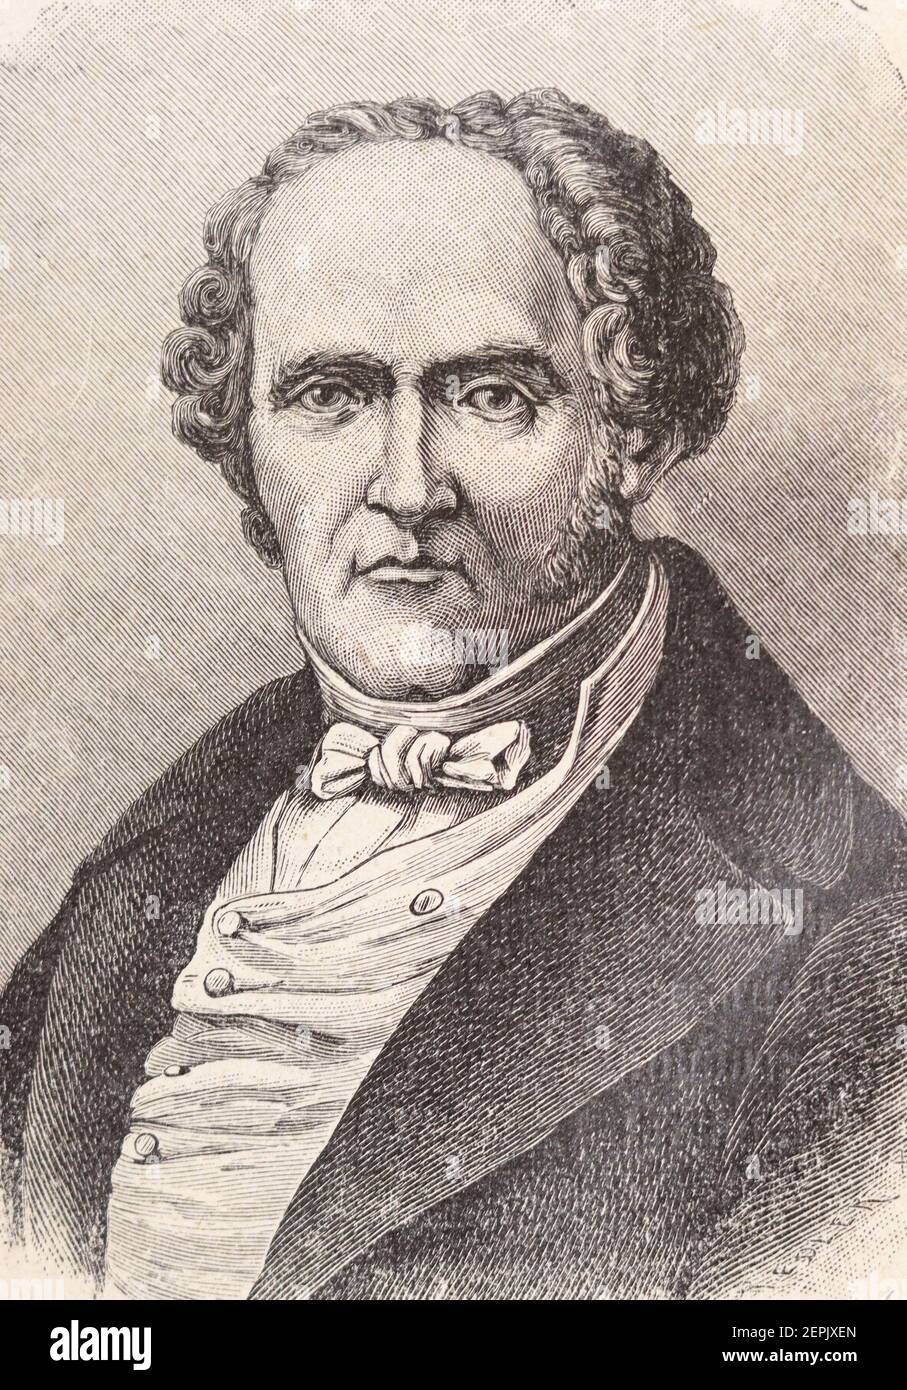 François Marie Charles Fourier (7 April 1772 – 10 October 1837) was a French philosopher, an influential early socialist thinker and one of the founders of utopian socialism. Some of Fourier's social and moral views, held to be radical in his lifetime, have become mainstream thinking in modern society. For instance, Fourier is credited with having originated the word feminism in 1837. Stock Photo